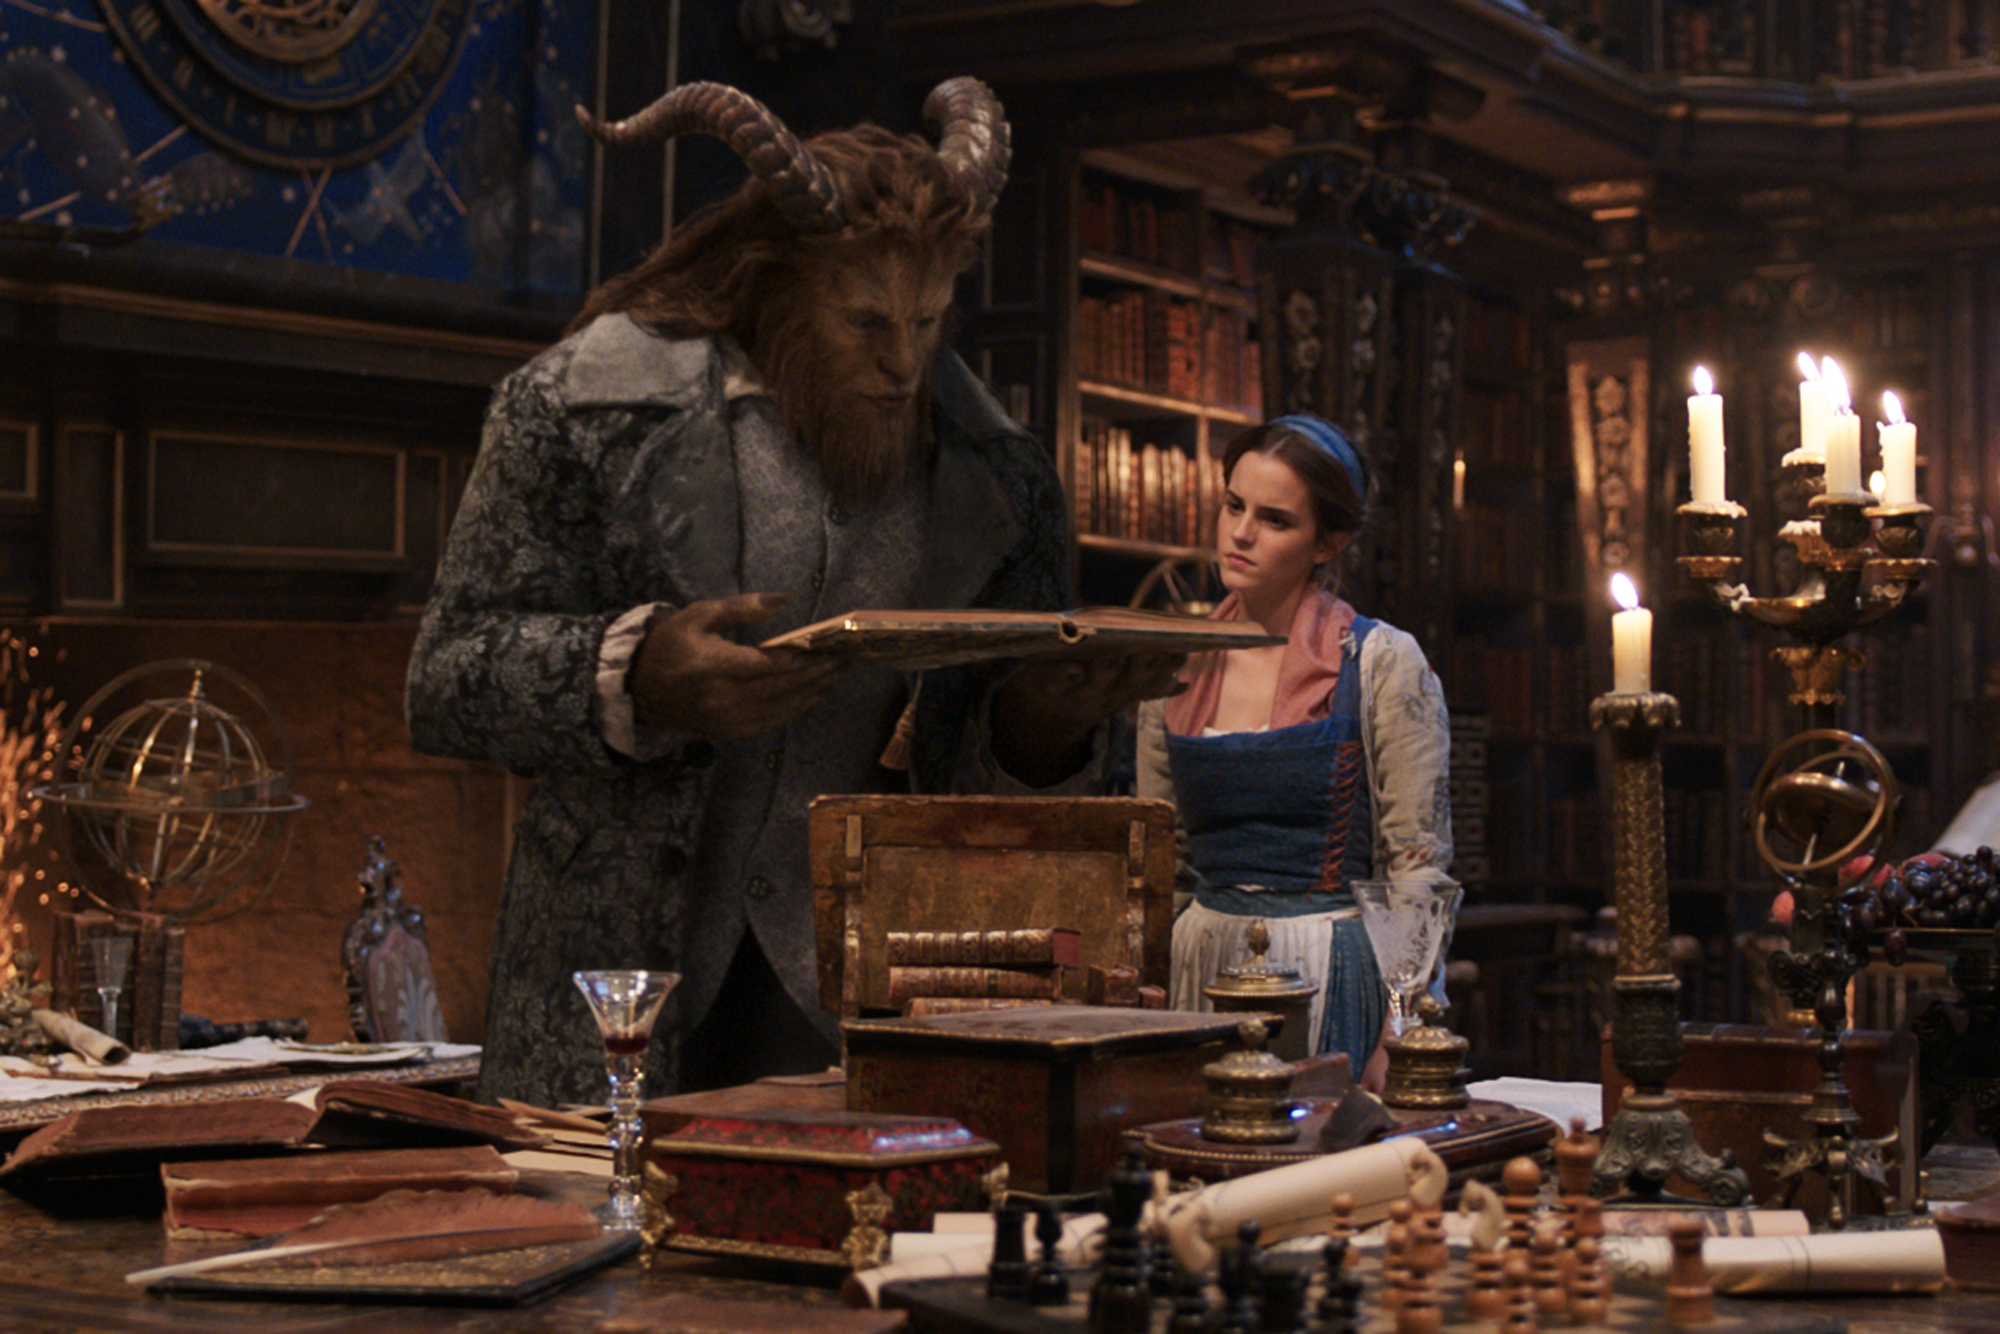 Beauty and the Beast's love story gets a little makeover in this year's live action remake.